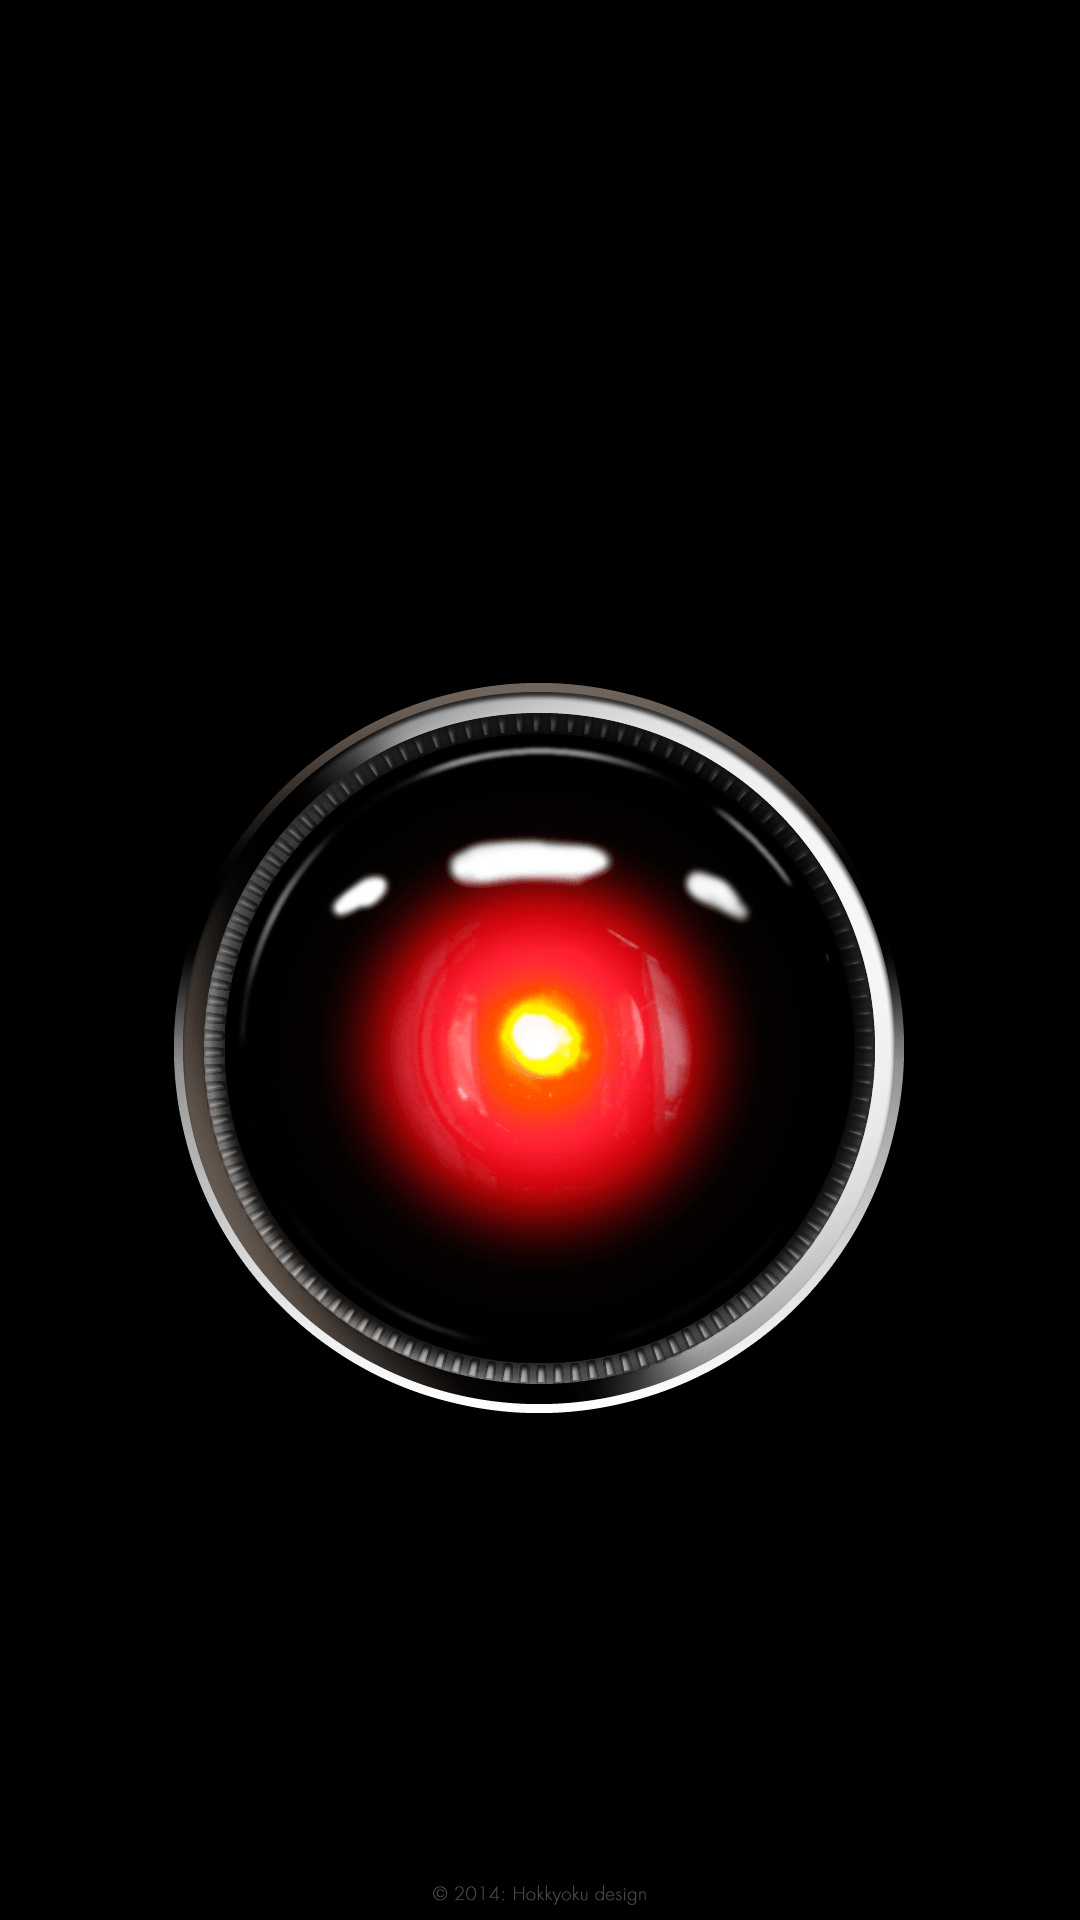 HAL 9000, 2001 Space Odyssey, Artificial intelligence, Cinematic icon, Space exploration, 1080x1920 Full HD Handy